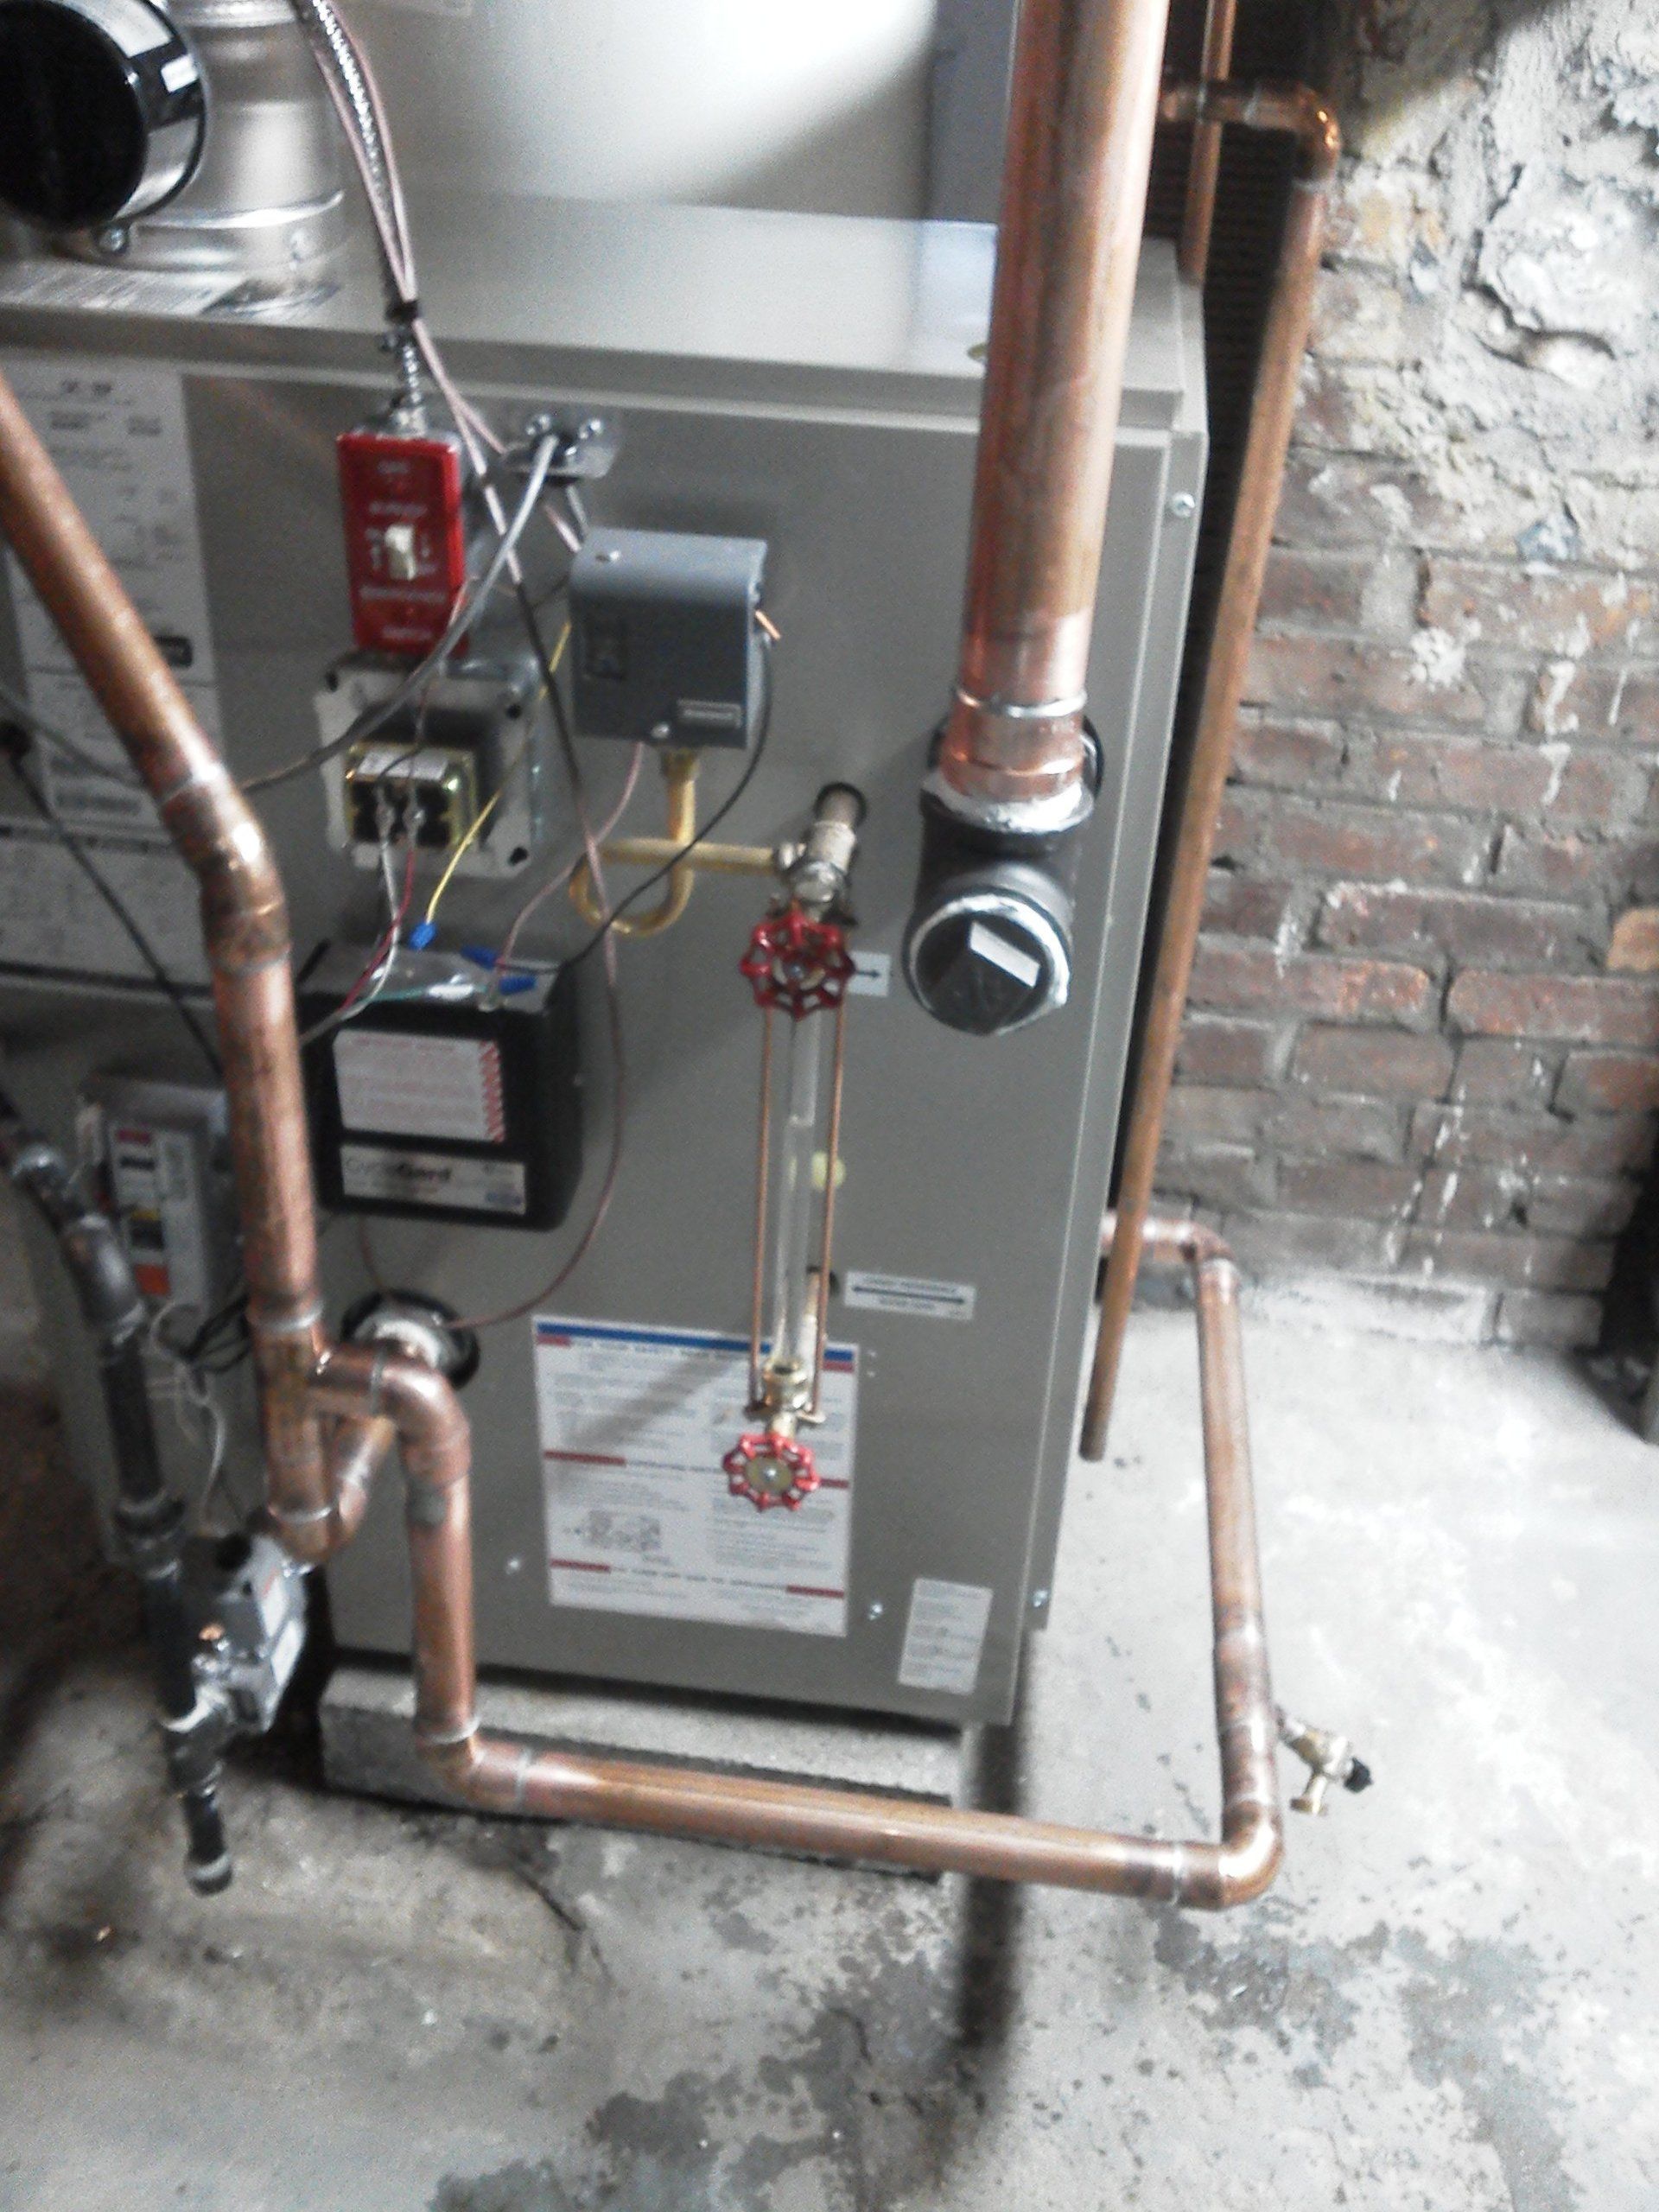 Hot water heater with copper piping in Saratoga Springs, NY